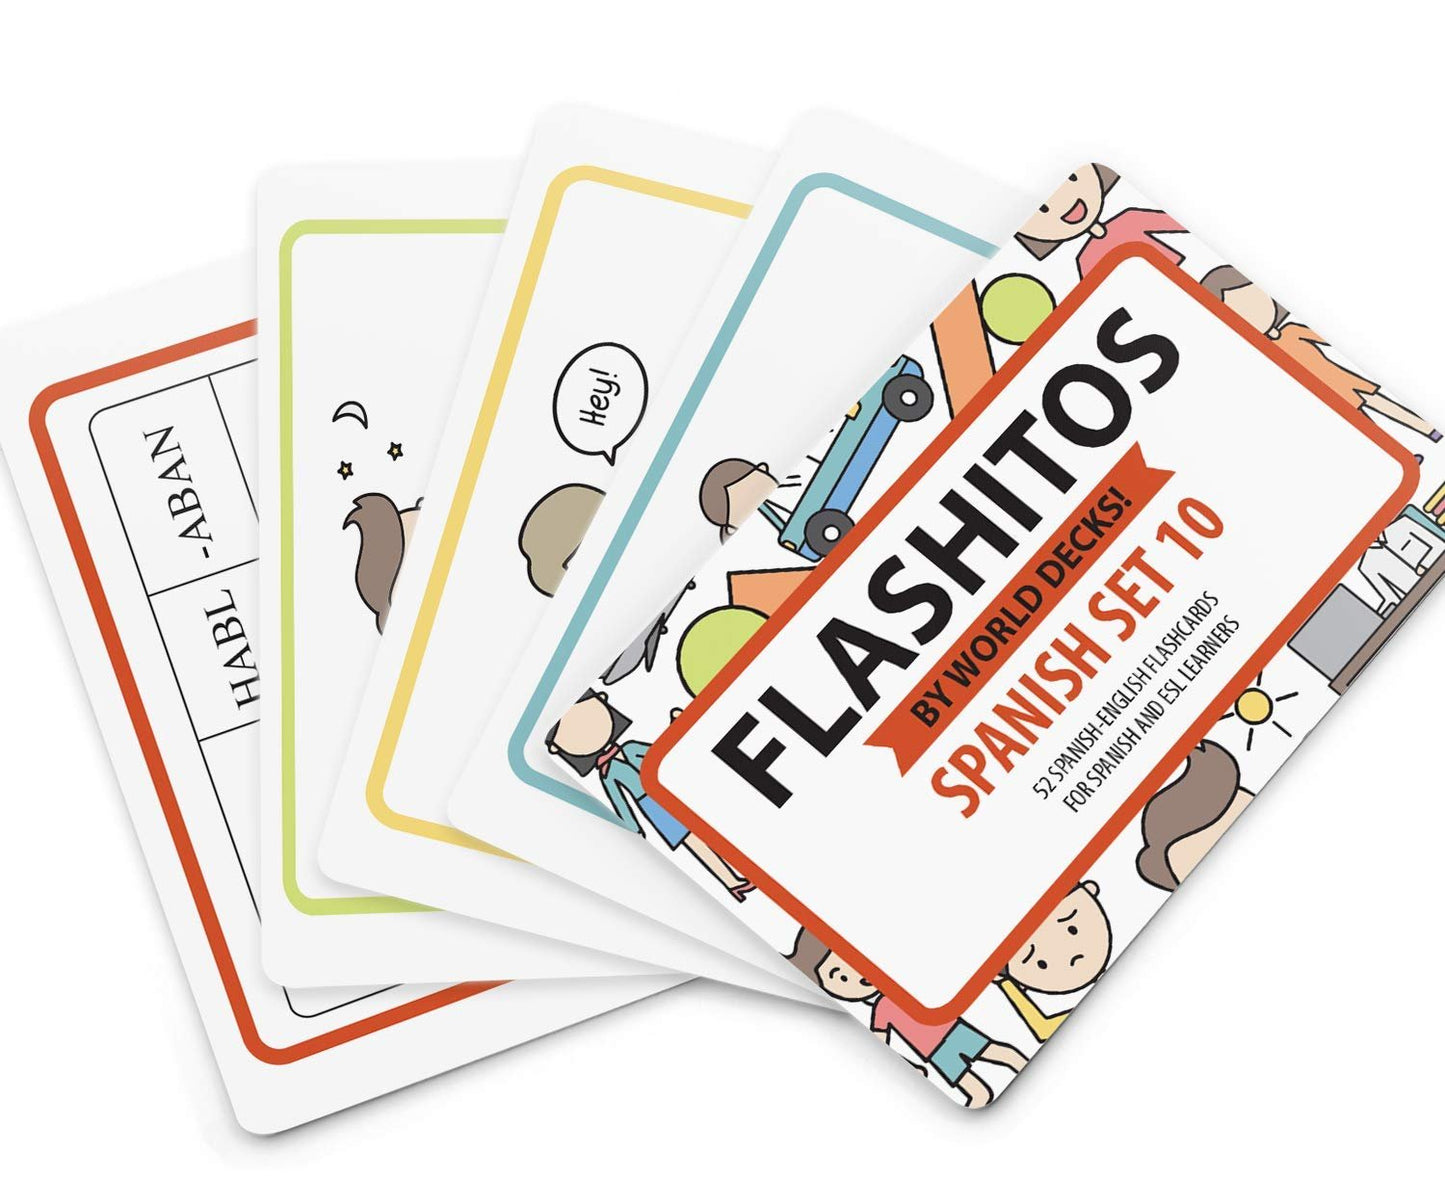 Flashitos by Quarterhouse! Spanish and French - ESL Flash Cards for K-12 Students and Teachers, Set of 52, 2.5 x 3.5 Inches